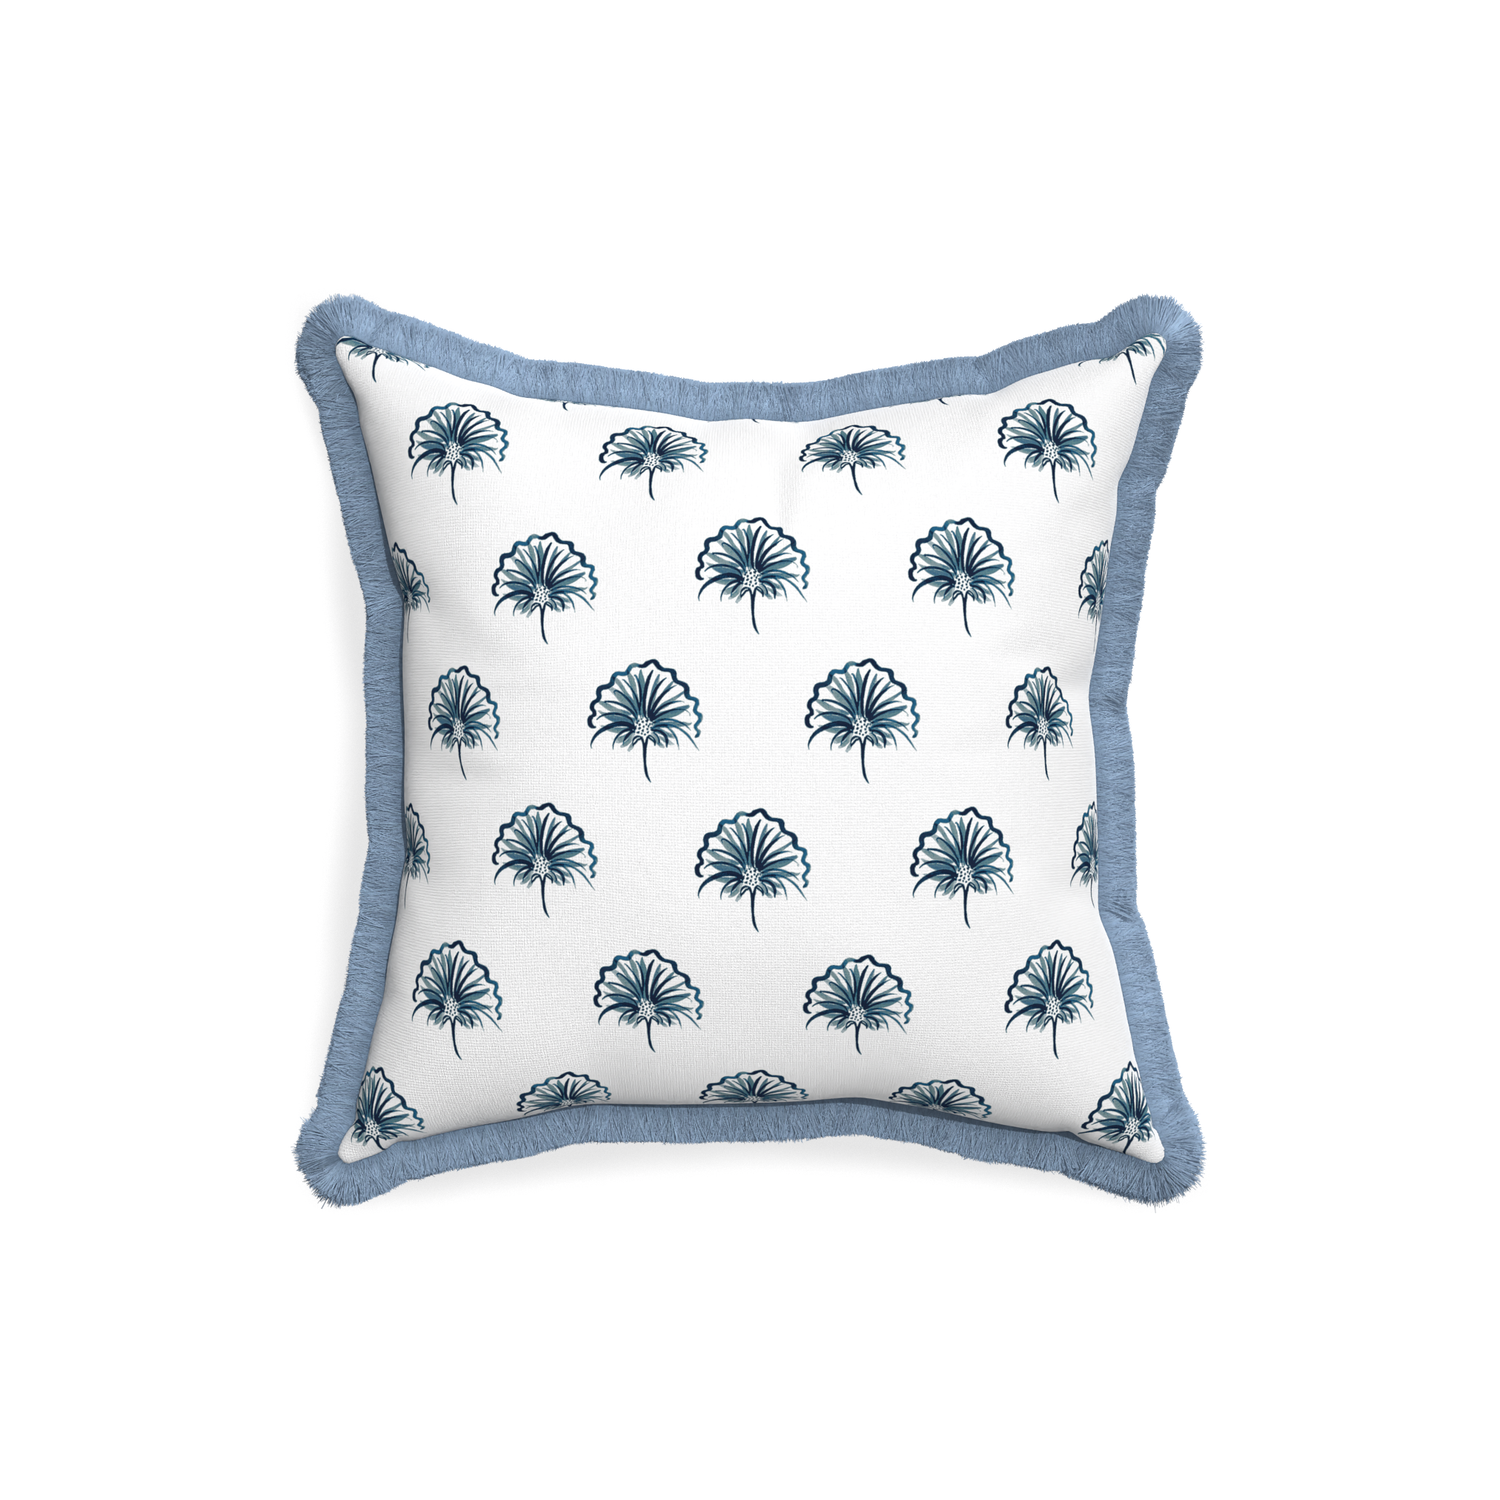 18-square penelope midnight custom pillow with sky fringe on white background